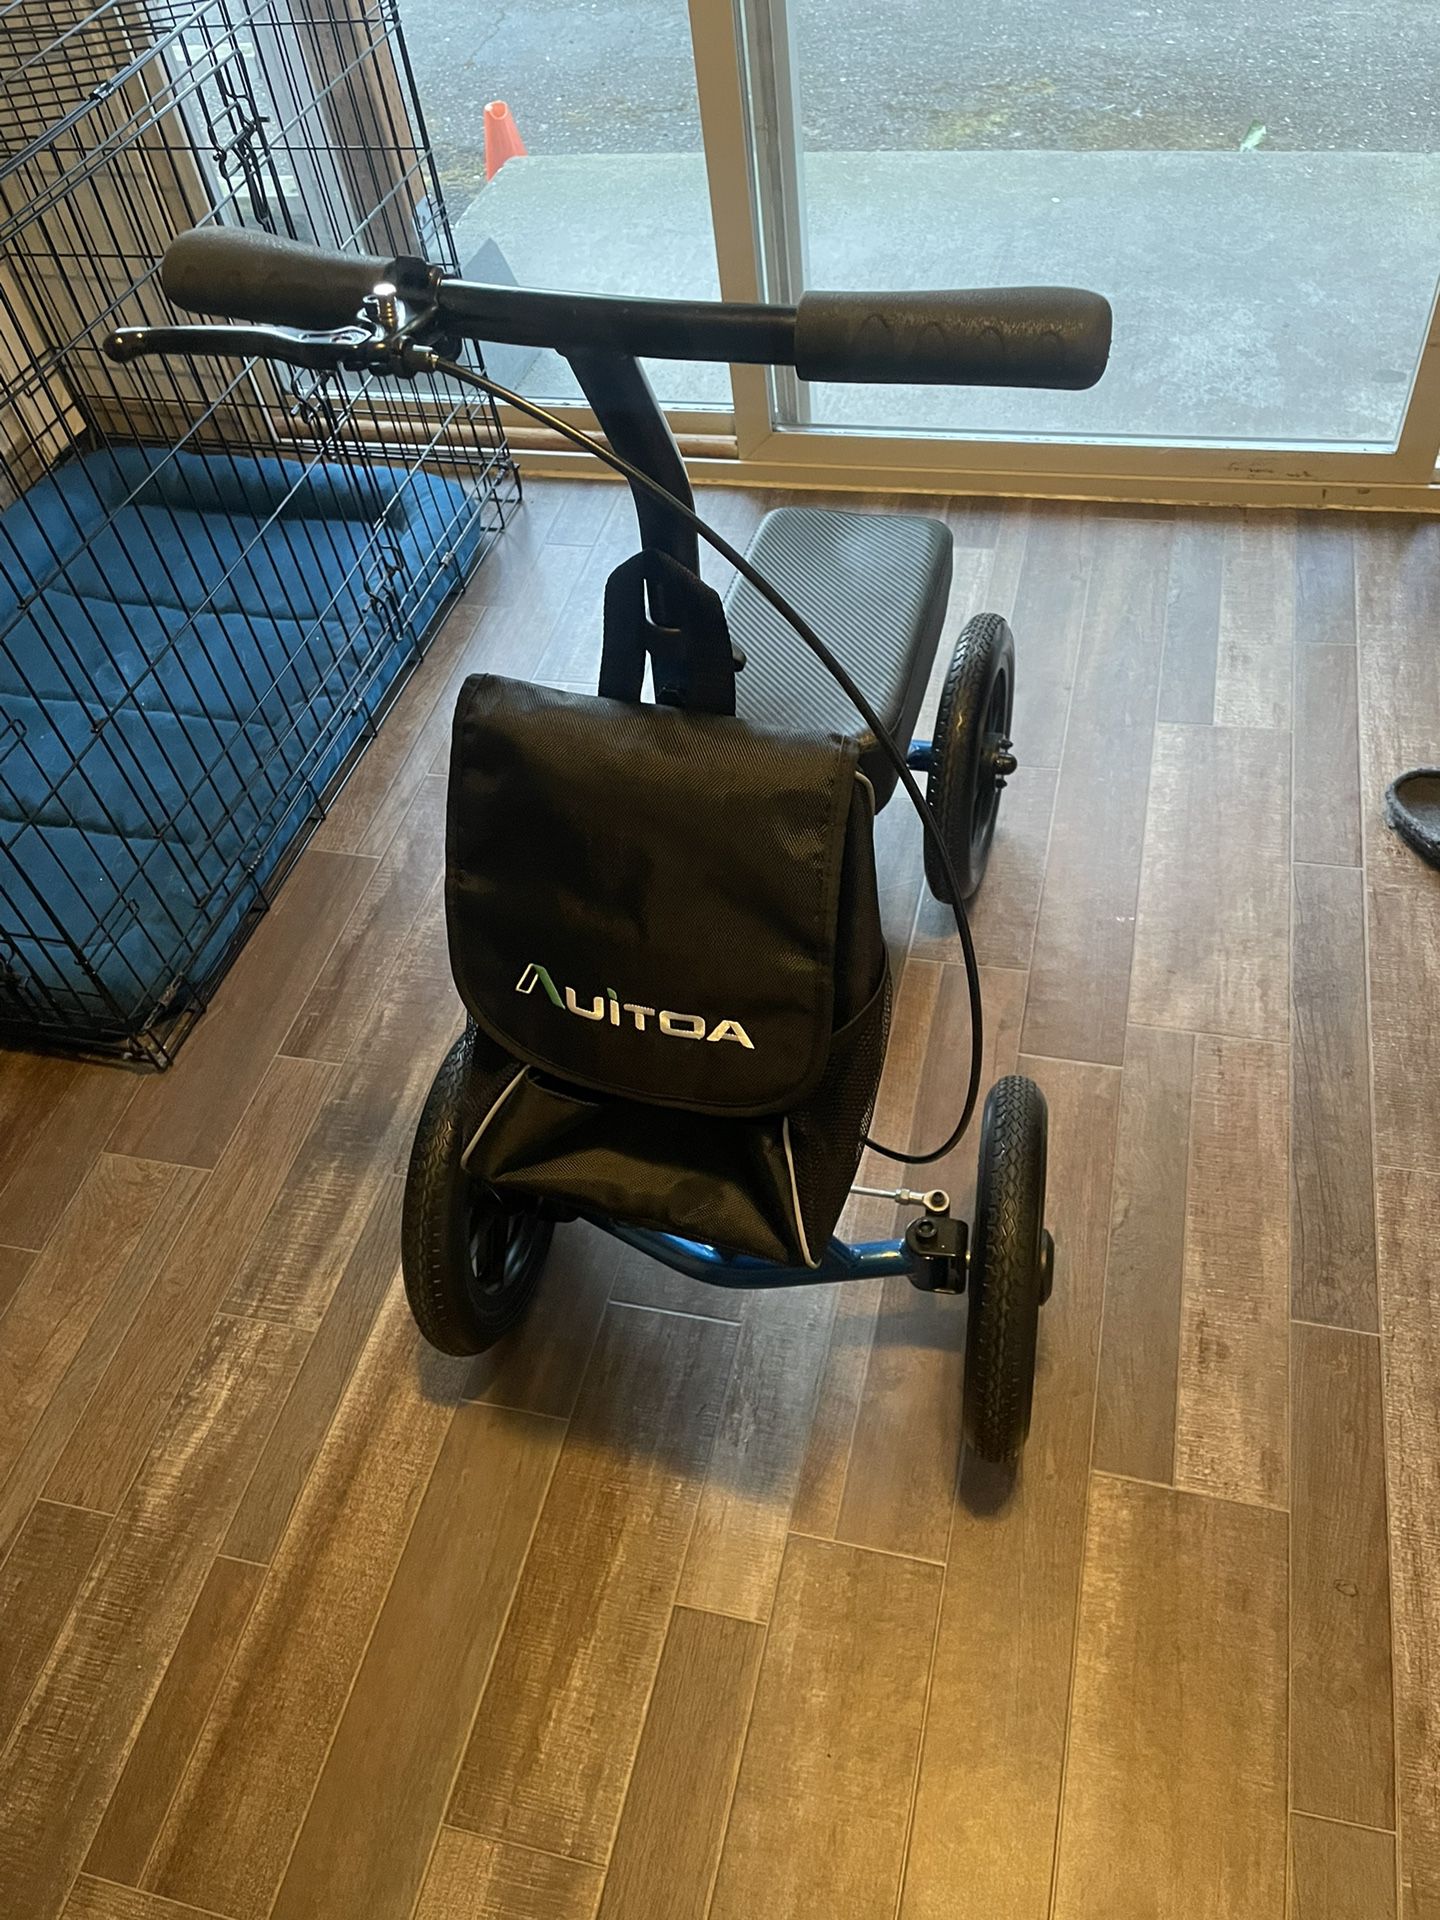 Brand New Knee Collapsible Scooter with Brakes (Mint condition) Pick up in burien 